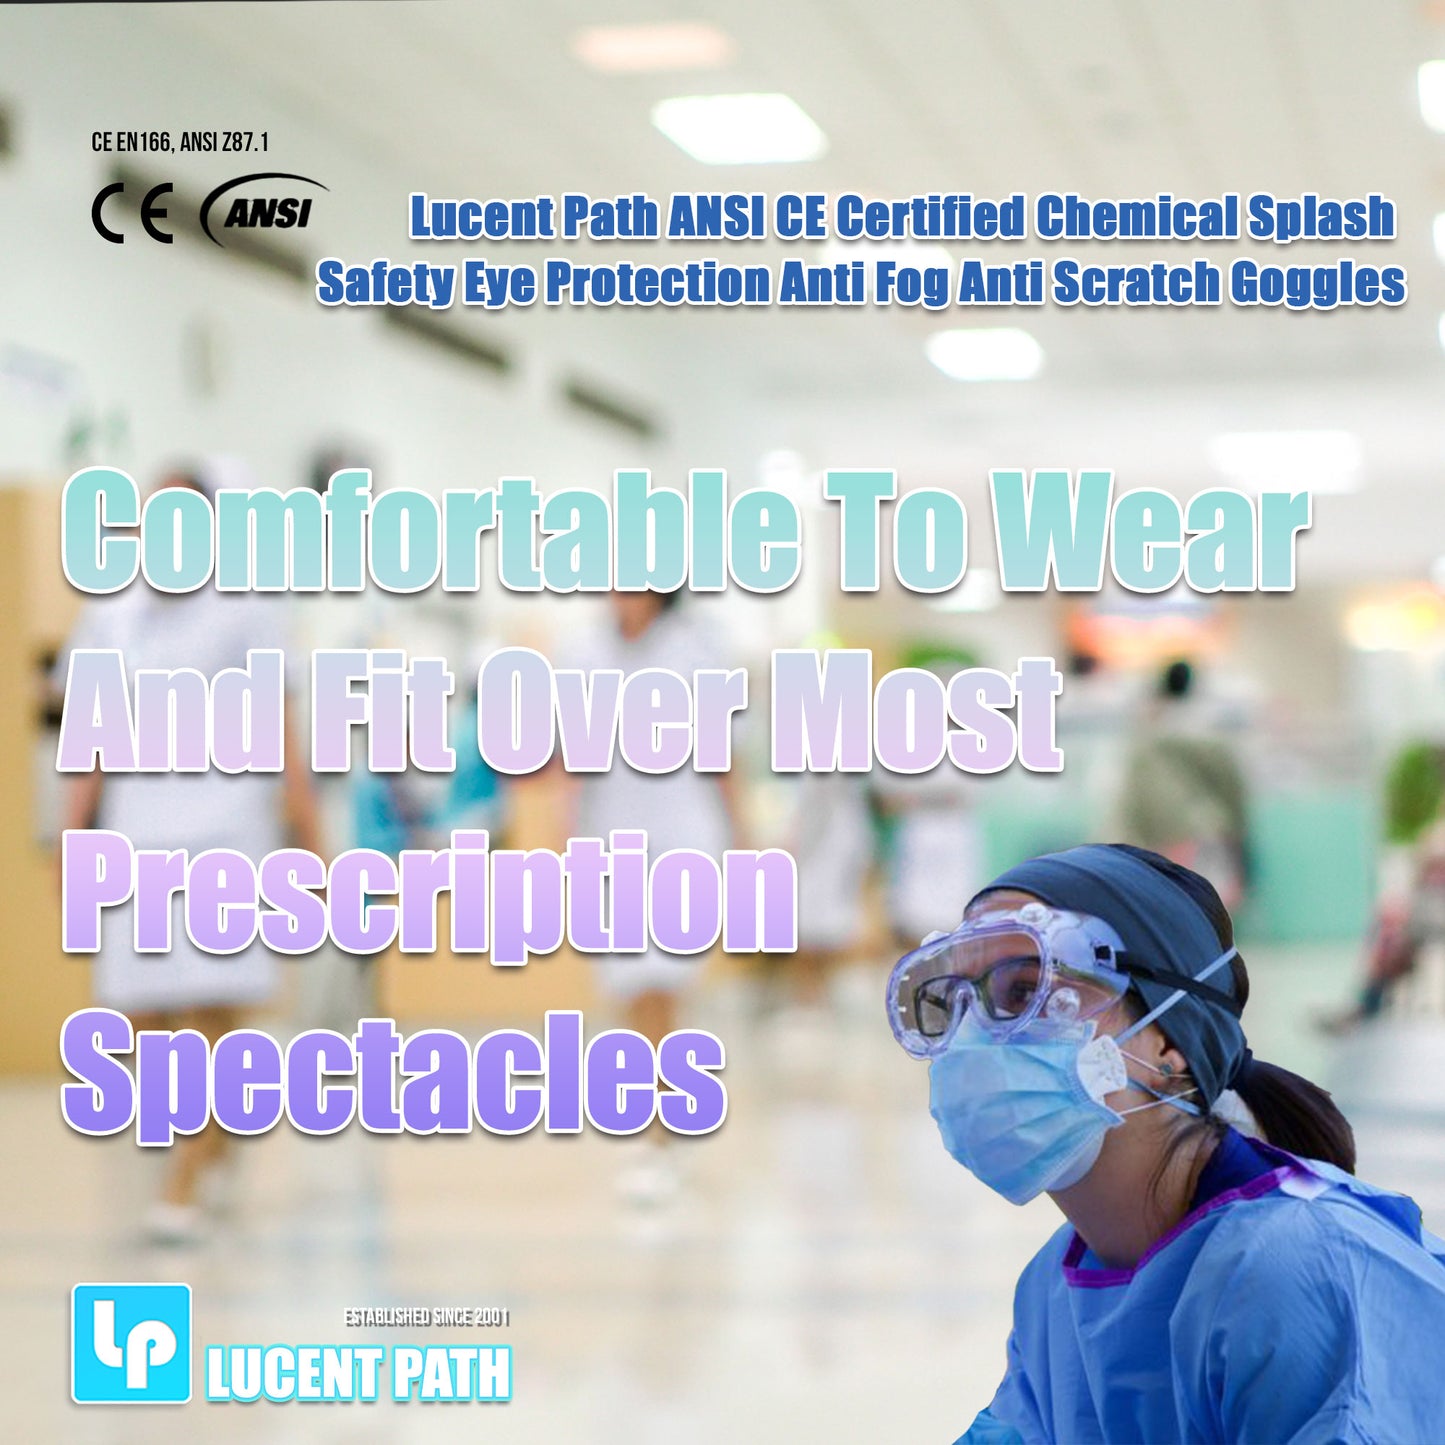 100 Packs Lucent Path ANSI CE Certified Chemical Splash High Impact Safety Eye Protection Anti Fog Anti Scratch Goggles